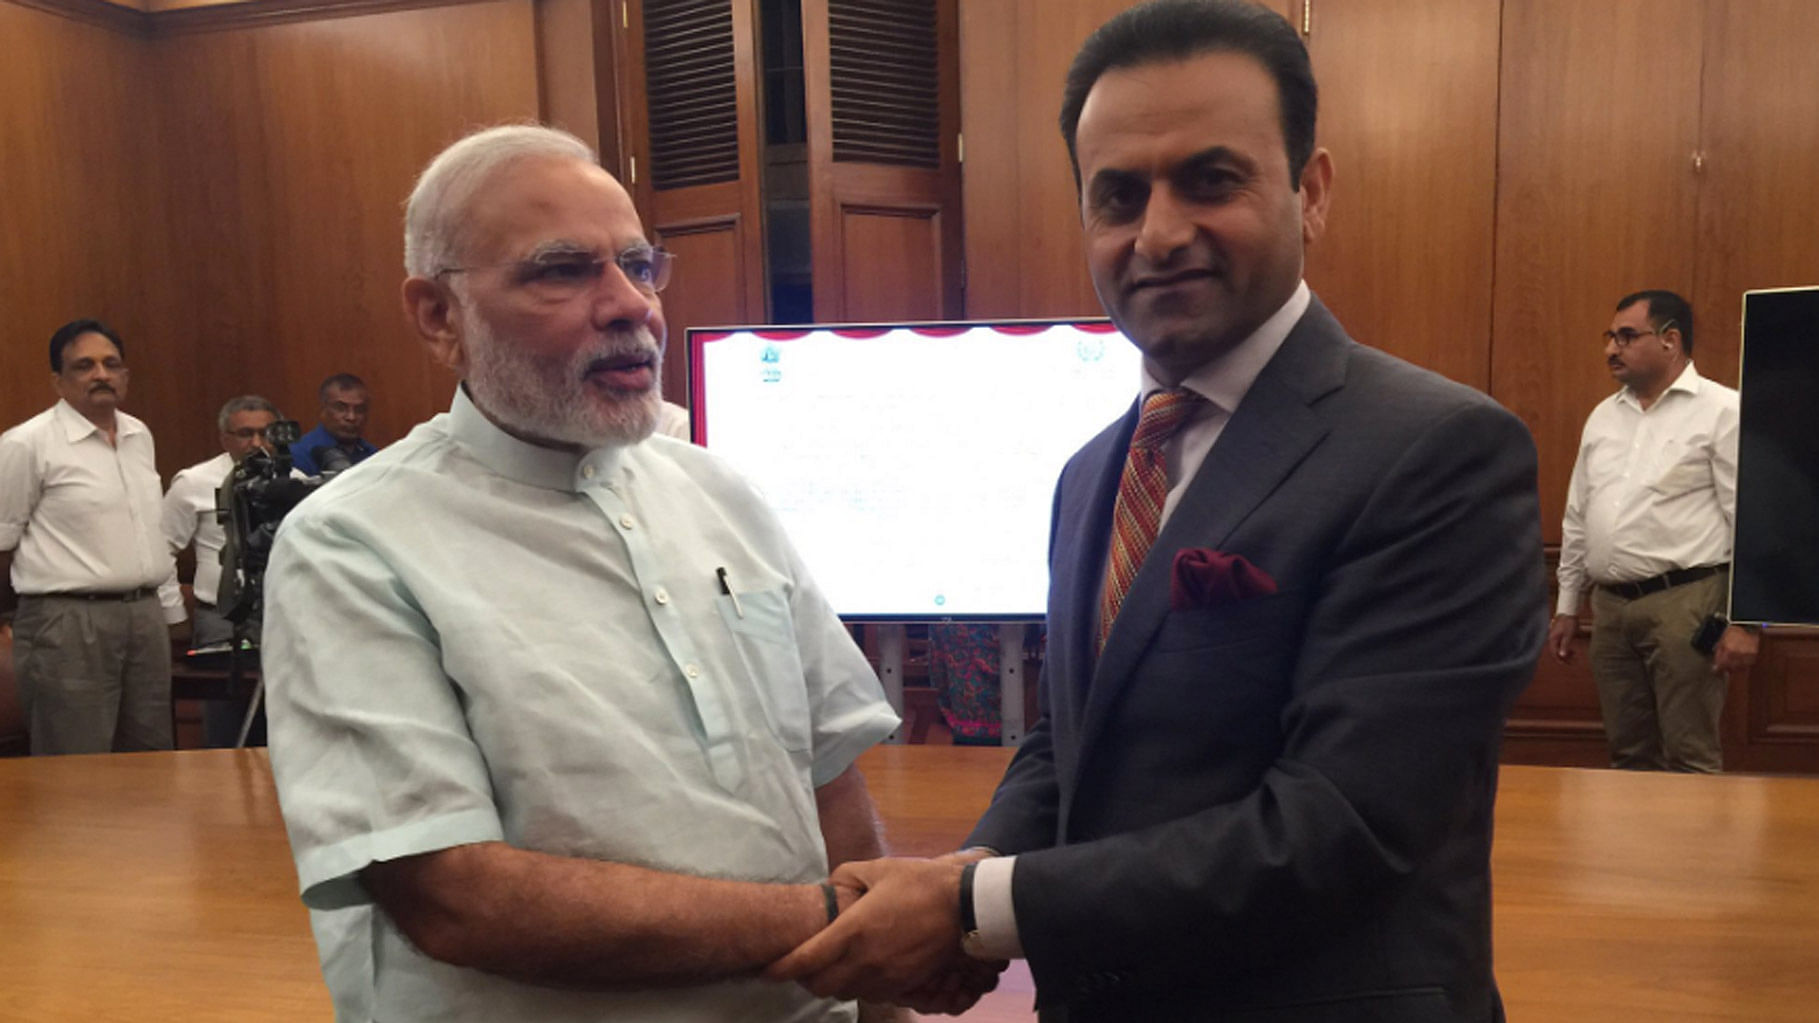 Prime Minister Narendra Modi with Afghanistan’s ambassador to India Dr Shaida Mohammad Abdali. (Photo Courtesy: Twitter/<a href="https://twitter.com/ShaidaAbdali/status/767674005981585408">@ShaidaAbdali</a>)